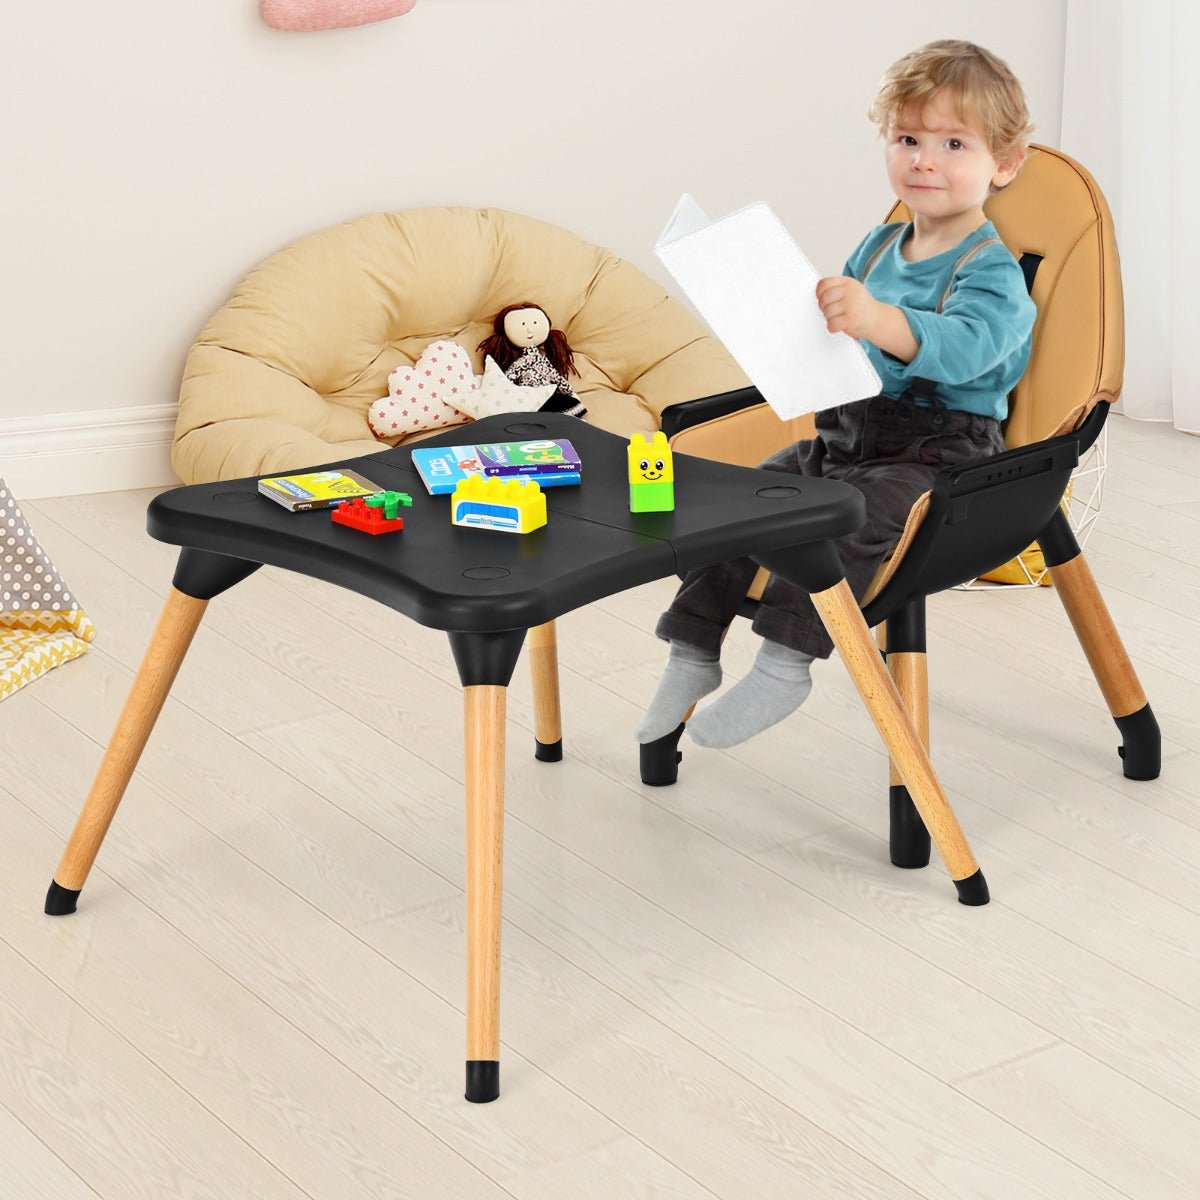 5-in-1 Coffee High Chair - Convertible Wooden Toddler Seating